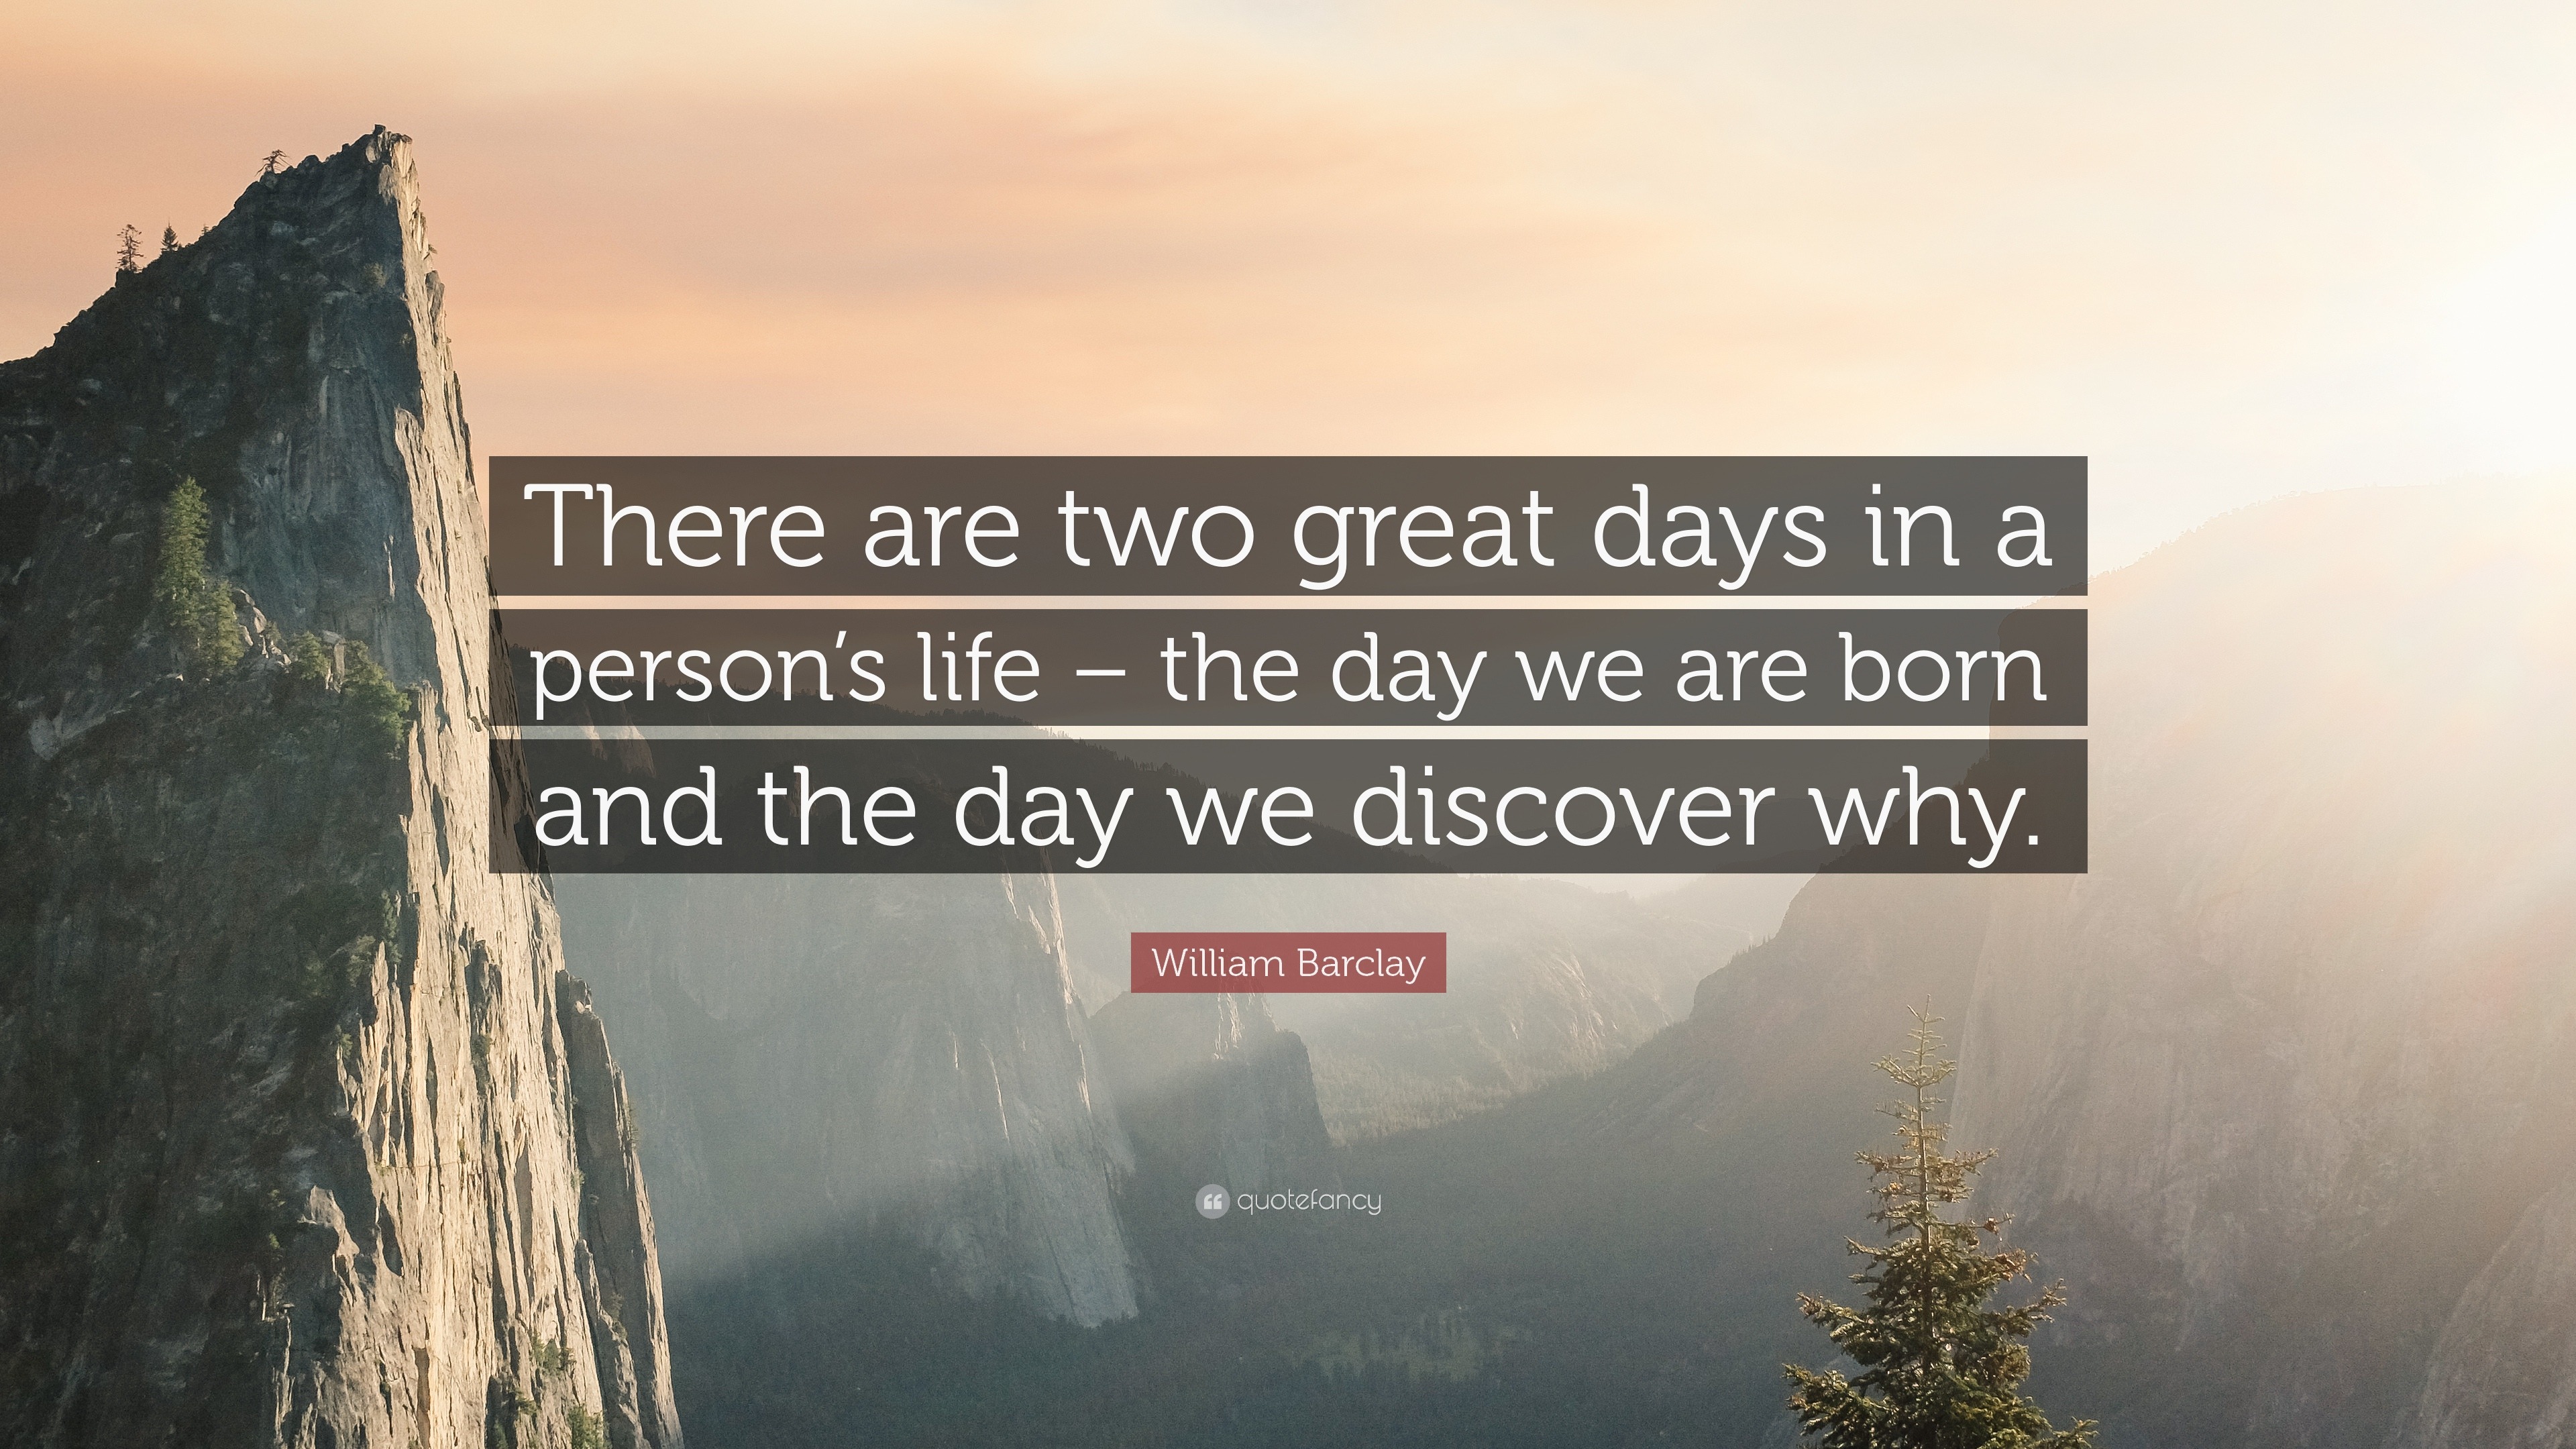 30483-William-Barclay-Quote-There-are-two-great-days-in-a-person-s-life.jpg